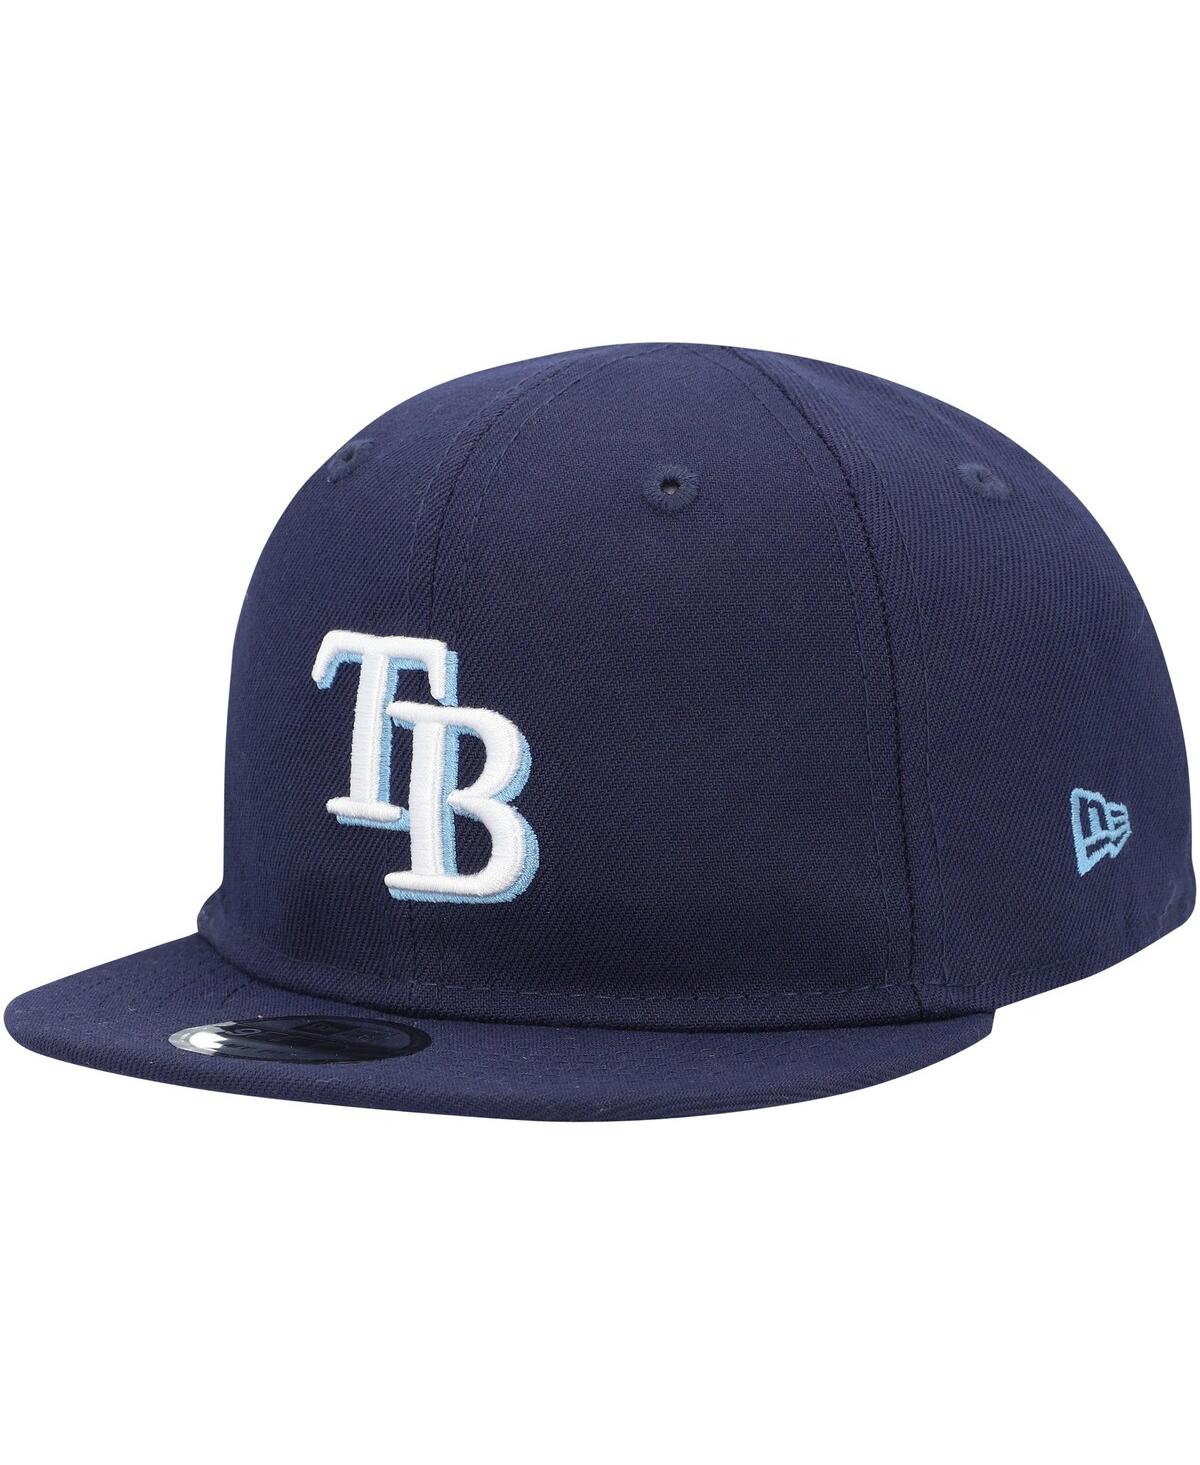 New Era Kids' Infant Boys And Girls  Navy Tampa Bay Rays My First 9fifty Adjustable Hat